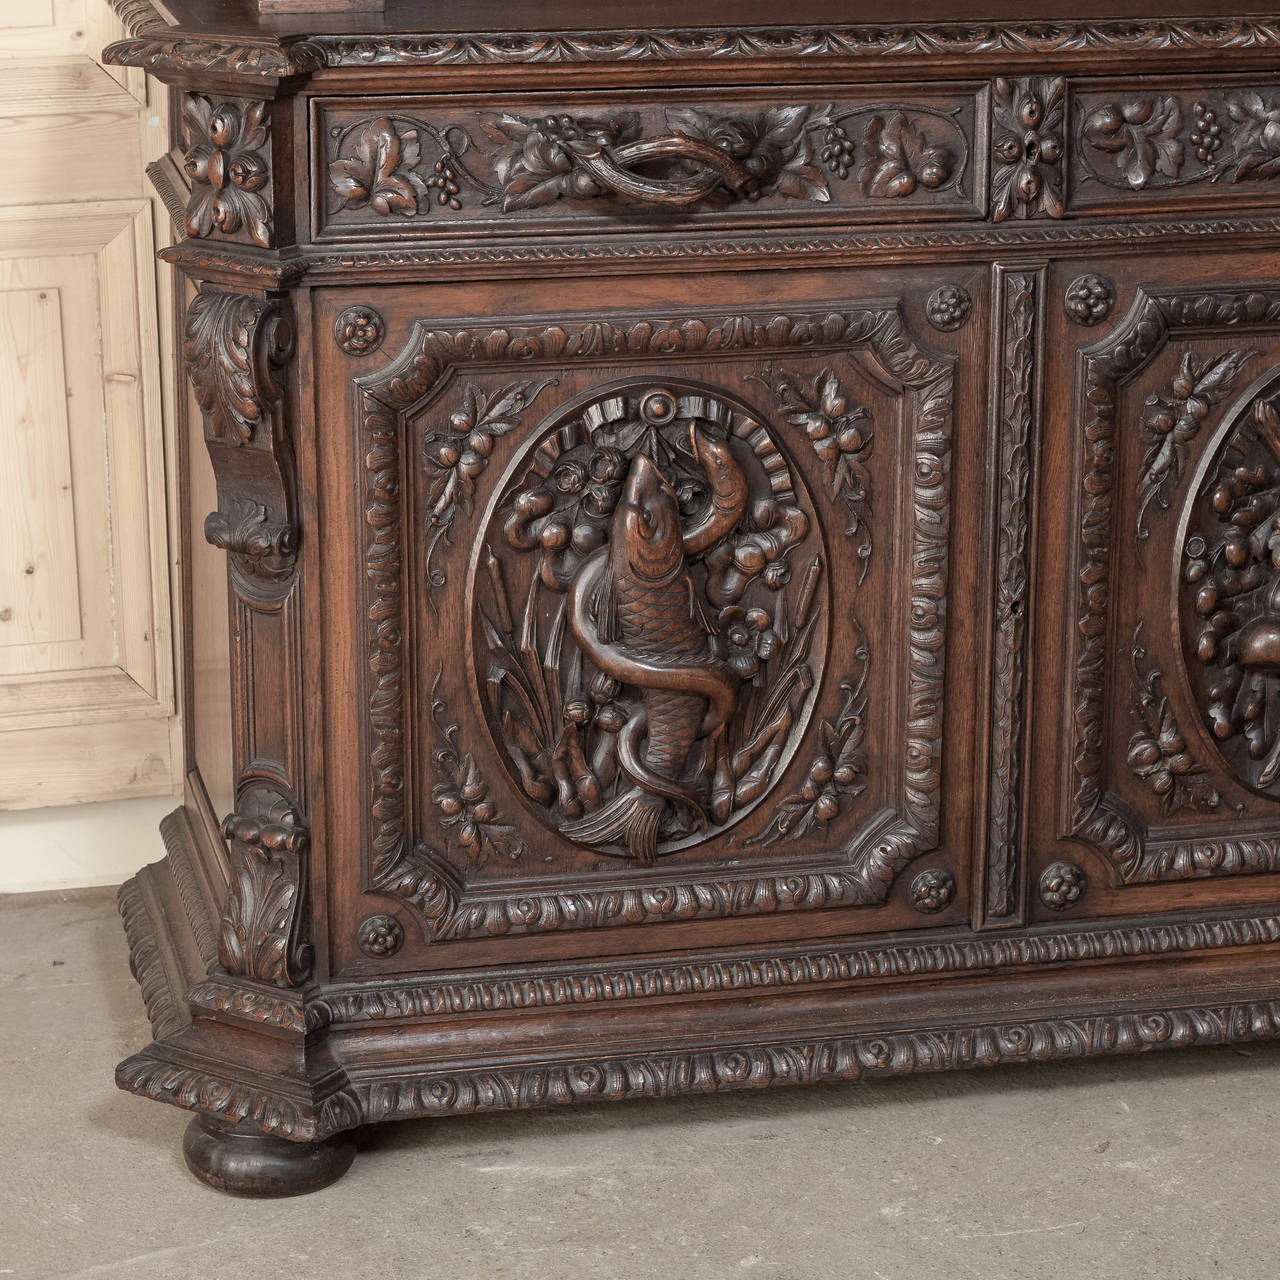 Renaissance Revival 19th Century Grand French Hunt Vaisselier/Sideboard